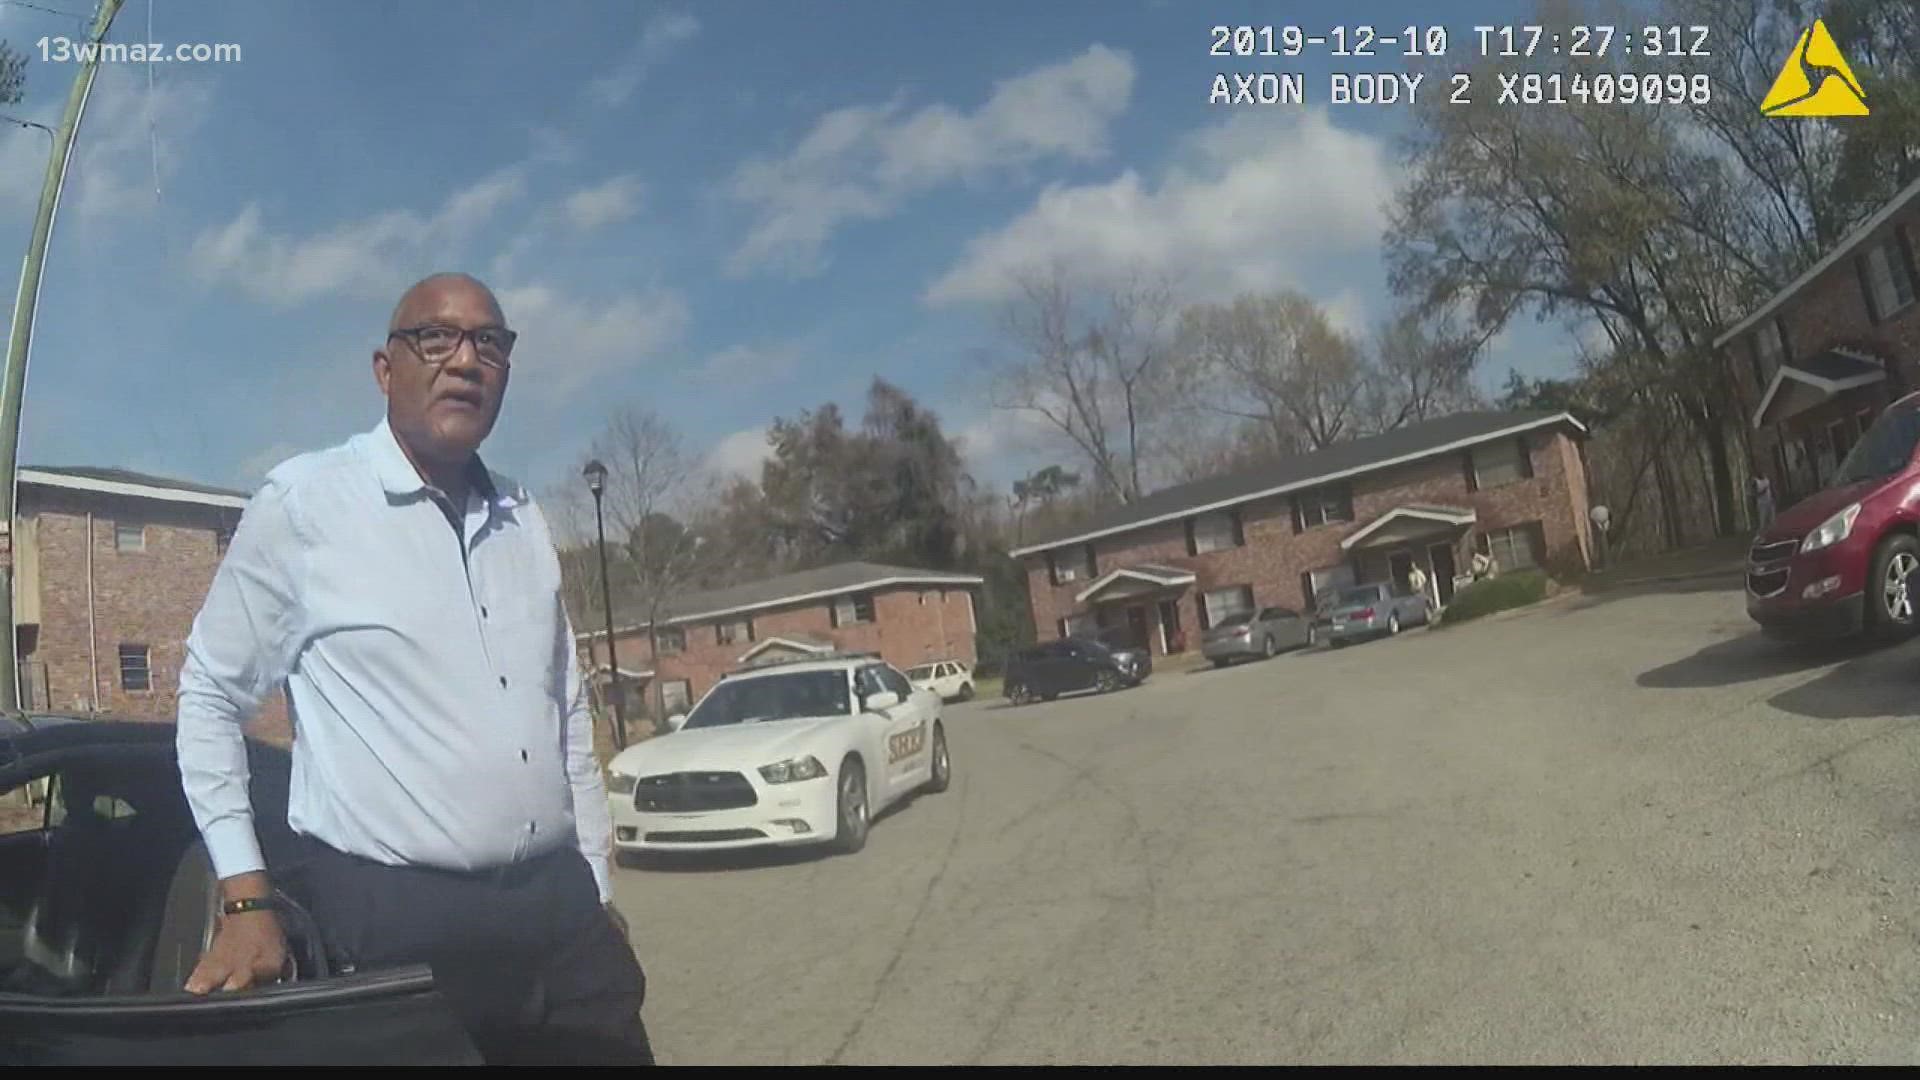 Bodycam video shows Ellis leaving the parking lot after deputies repeatedly asked him to leave, but minutes later, video shows Ellis returned.